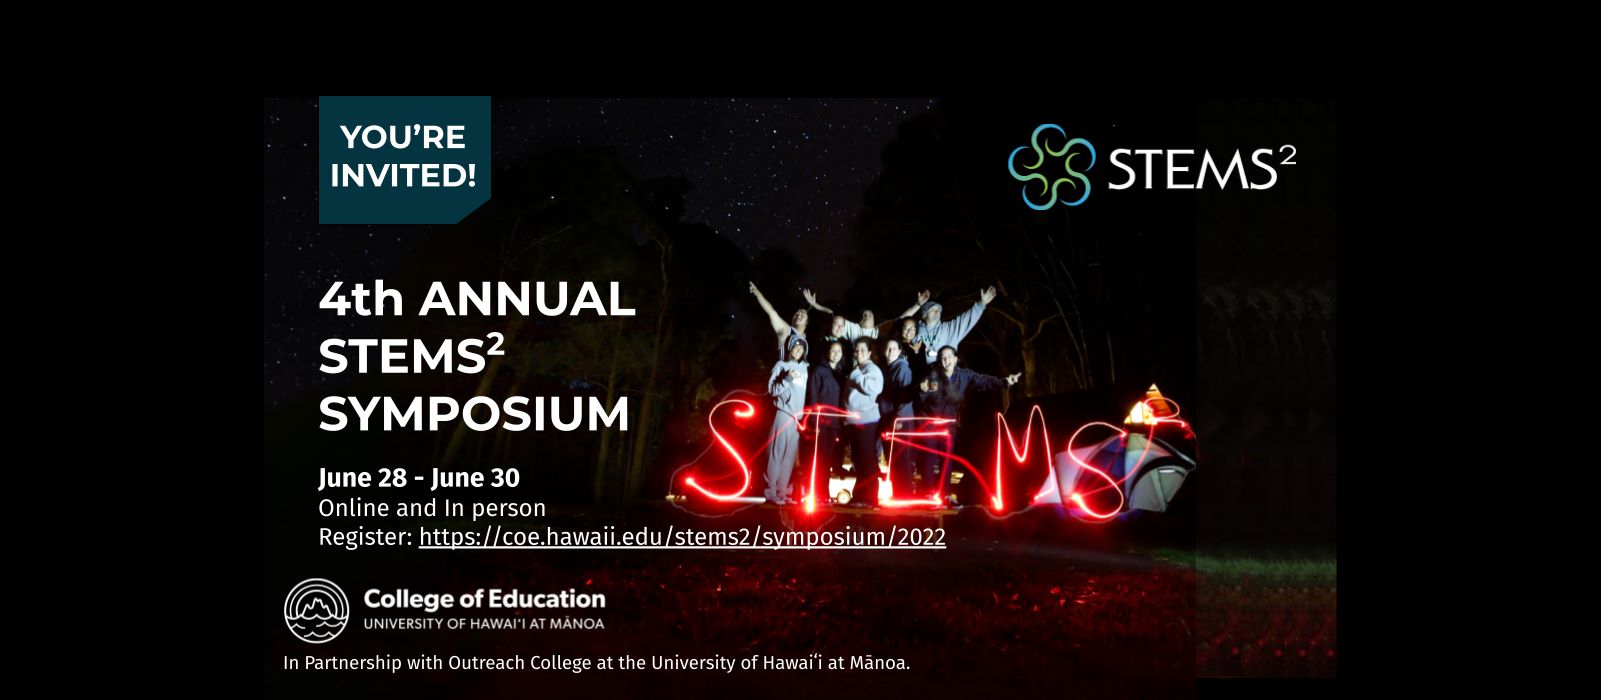 Your&#039;re Invited to the 2022 STEMS^2 Symposium